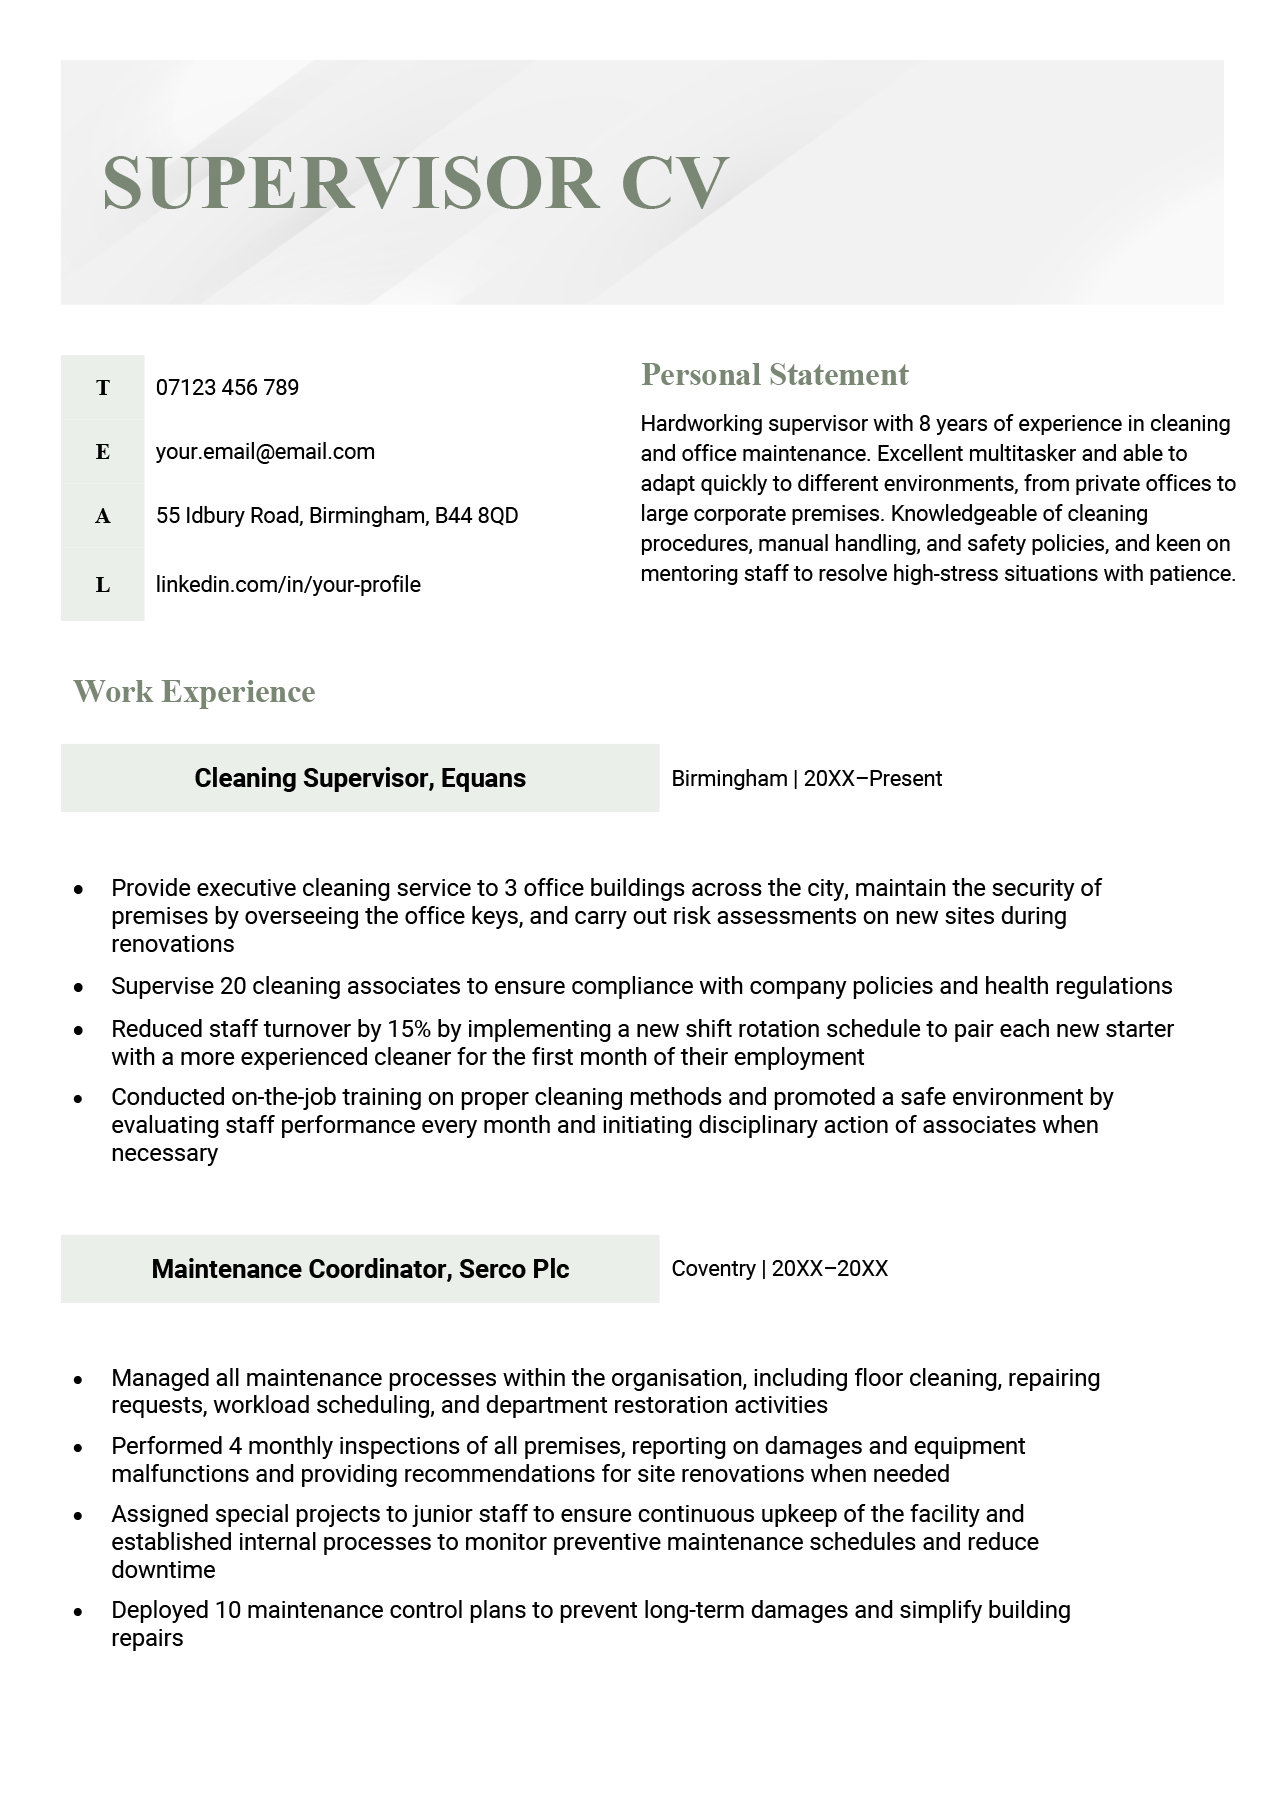 The first page of a supervisor CV example with a green header and sections for the applicant's contact information, personal statement, and work experience